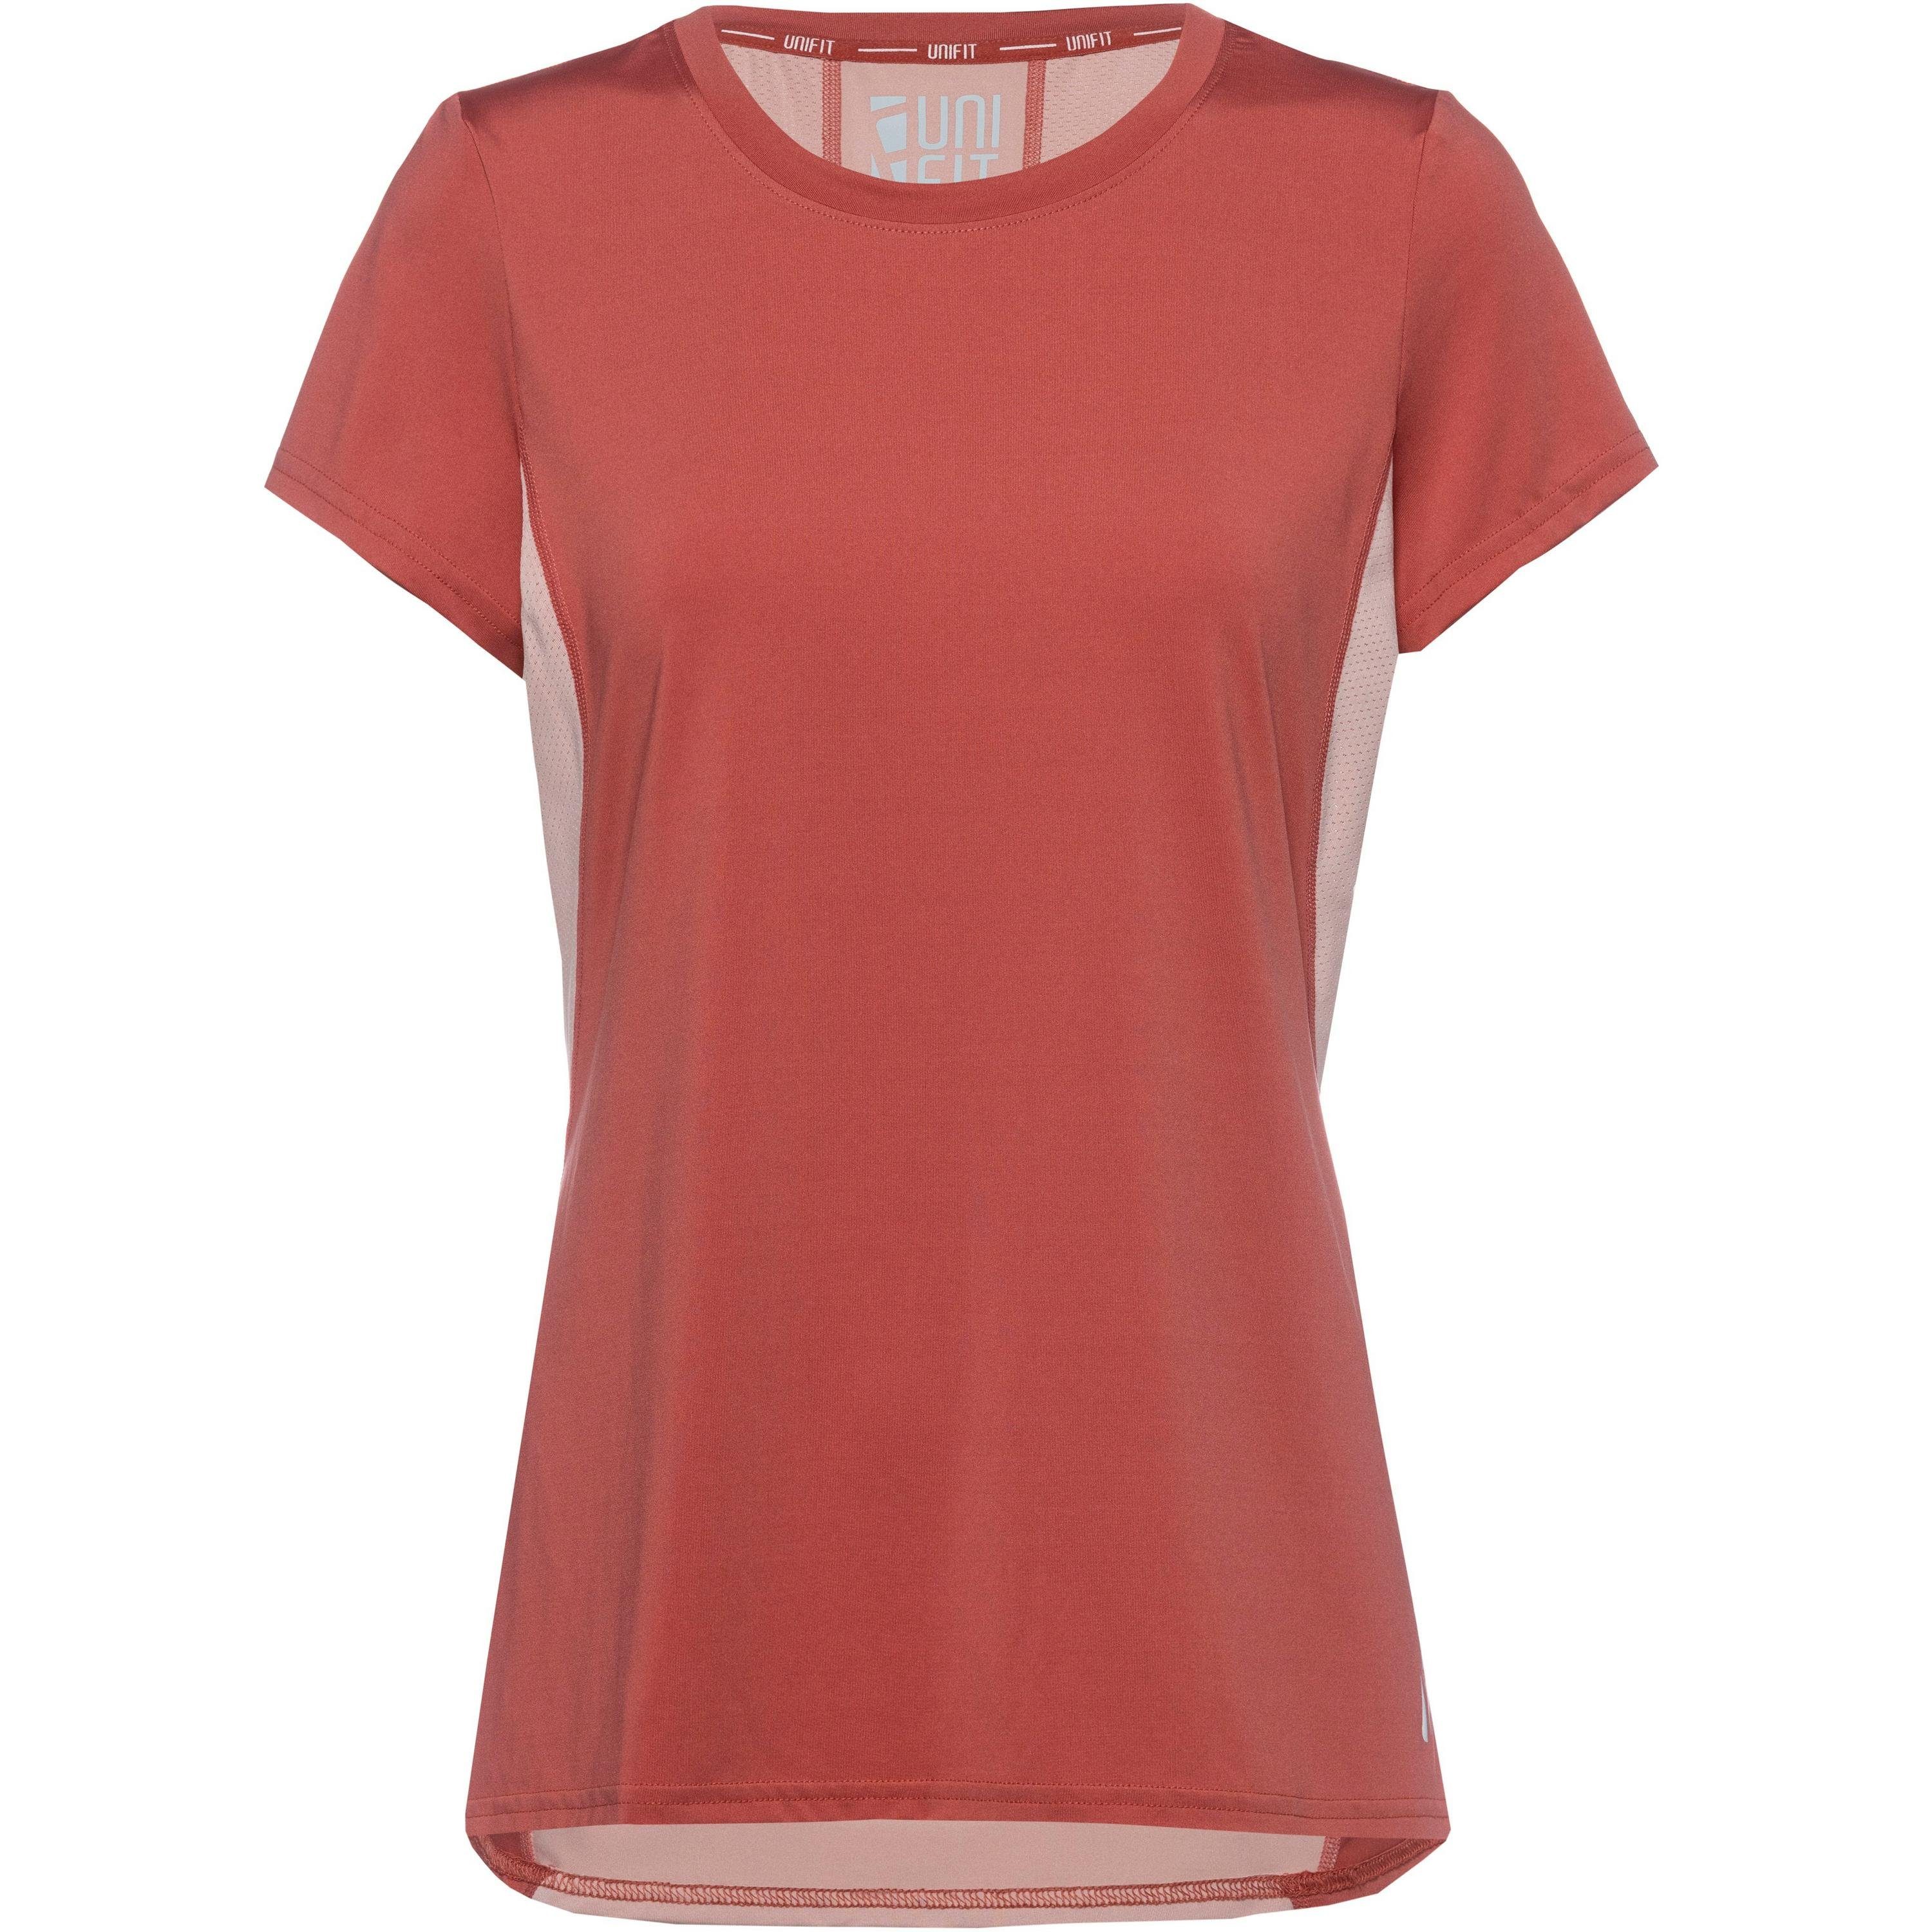 unifit Funktionsshirt mineral red